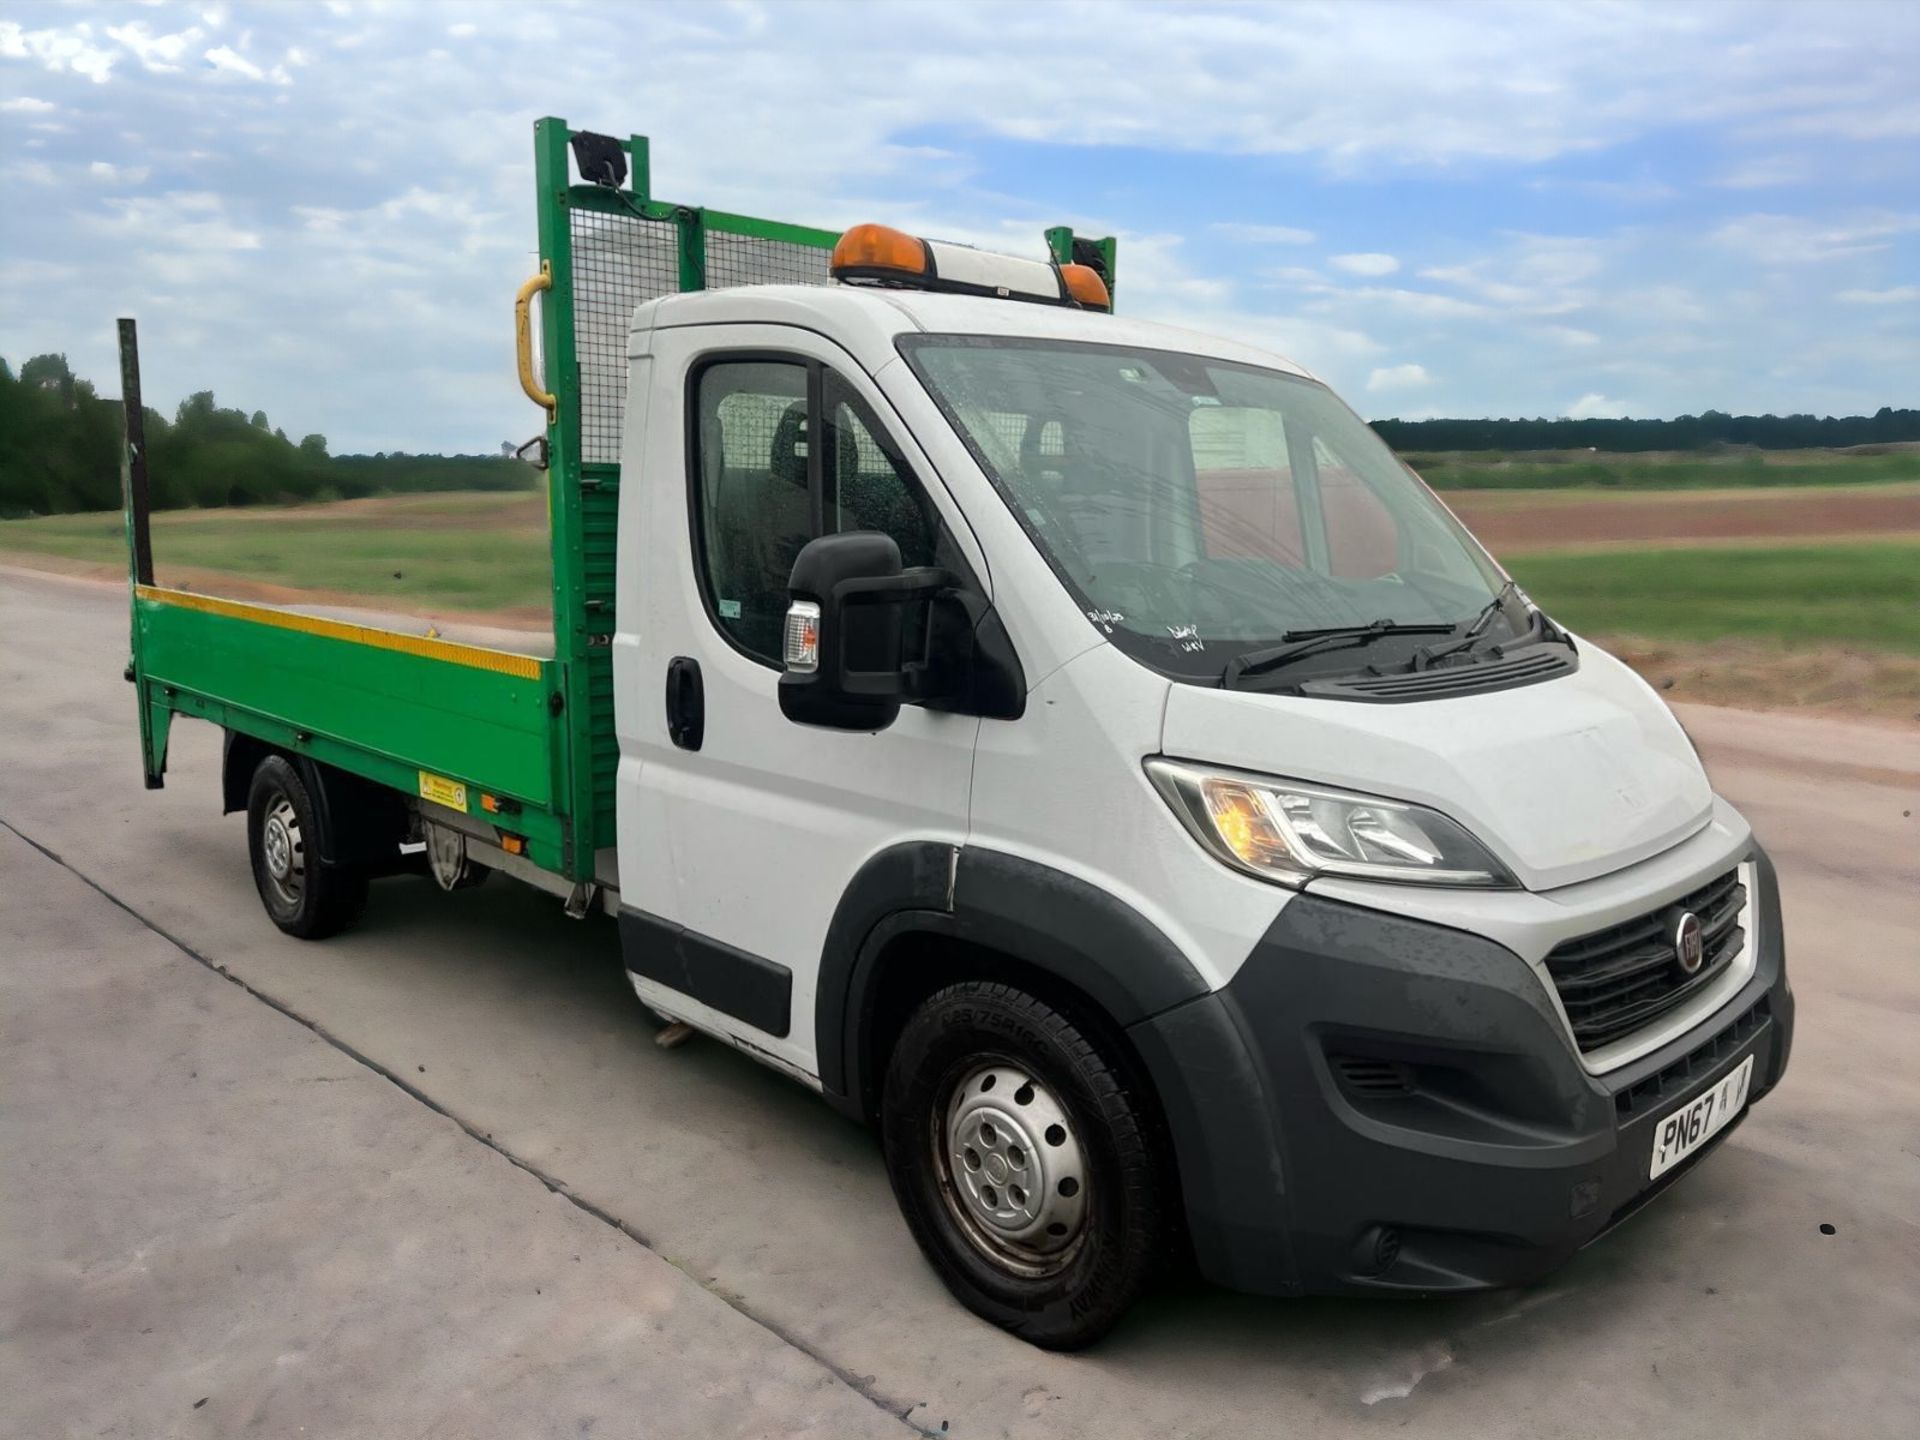 2017 FIAT DUCATO DROPSIDE TRUCK - RELIABLE AND EFFICIENT WORK COMPANION - Image 4 of 6